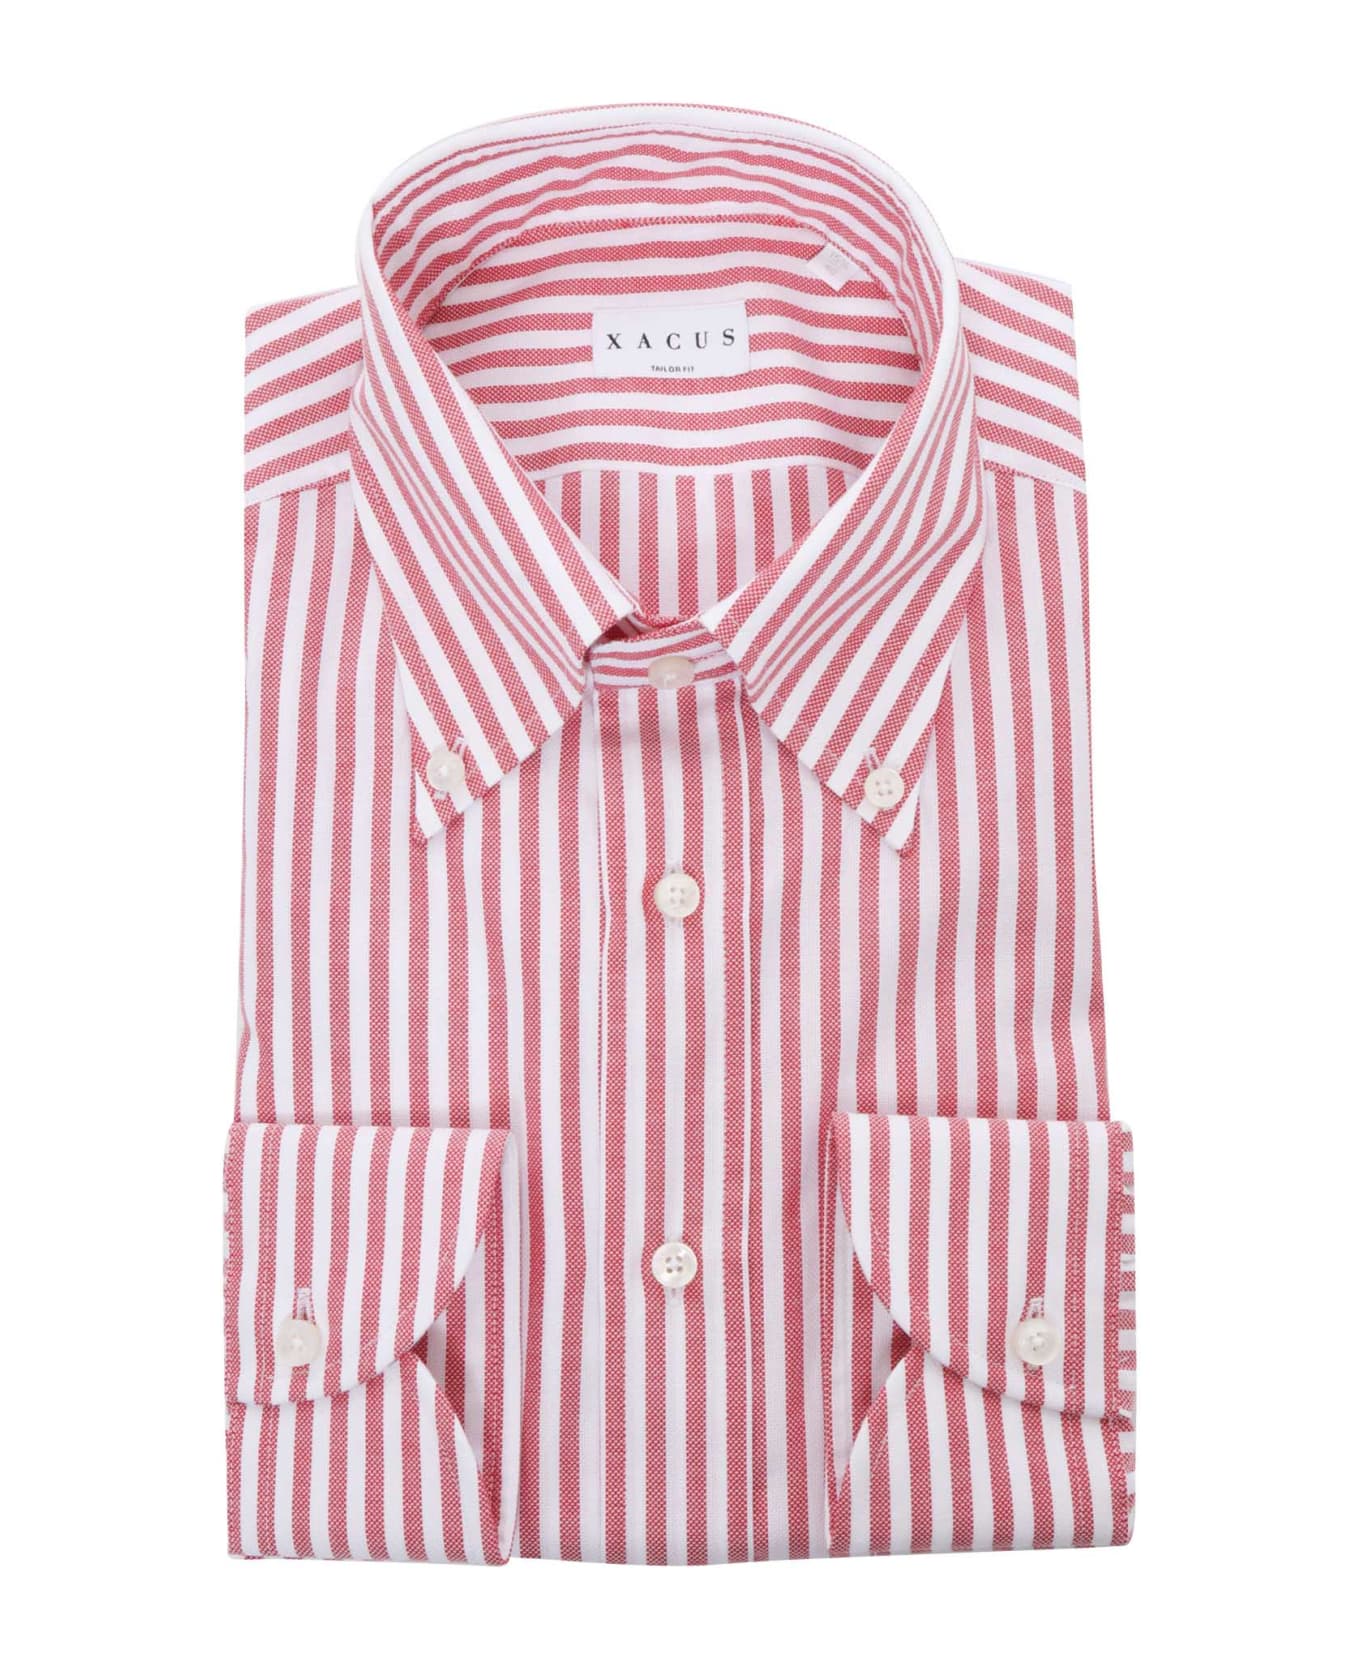 Xacus Red Striped Shirt - MULTICOLOR